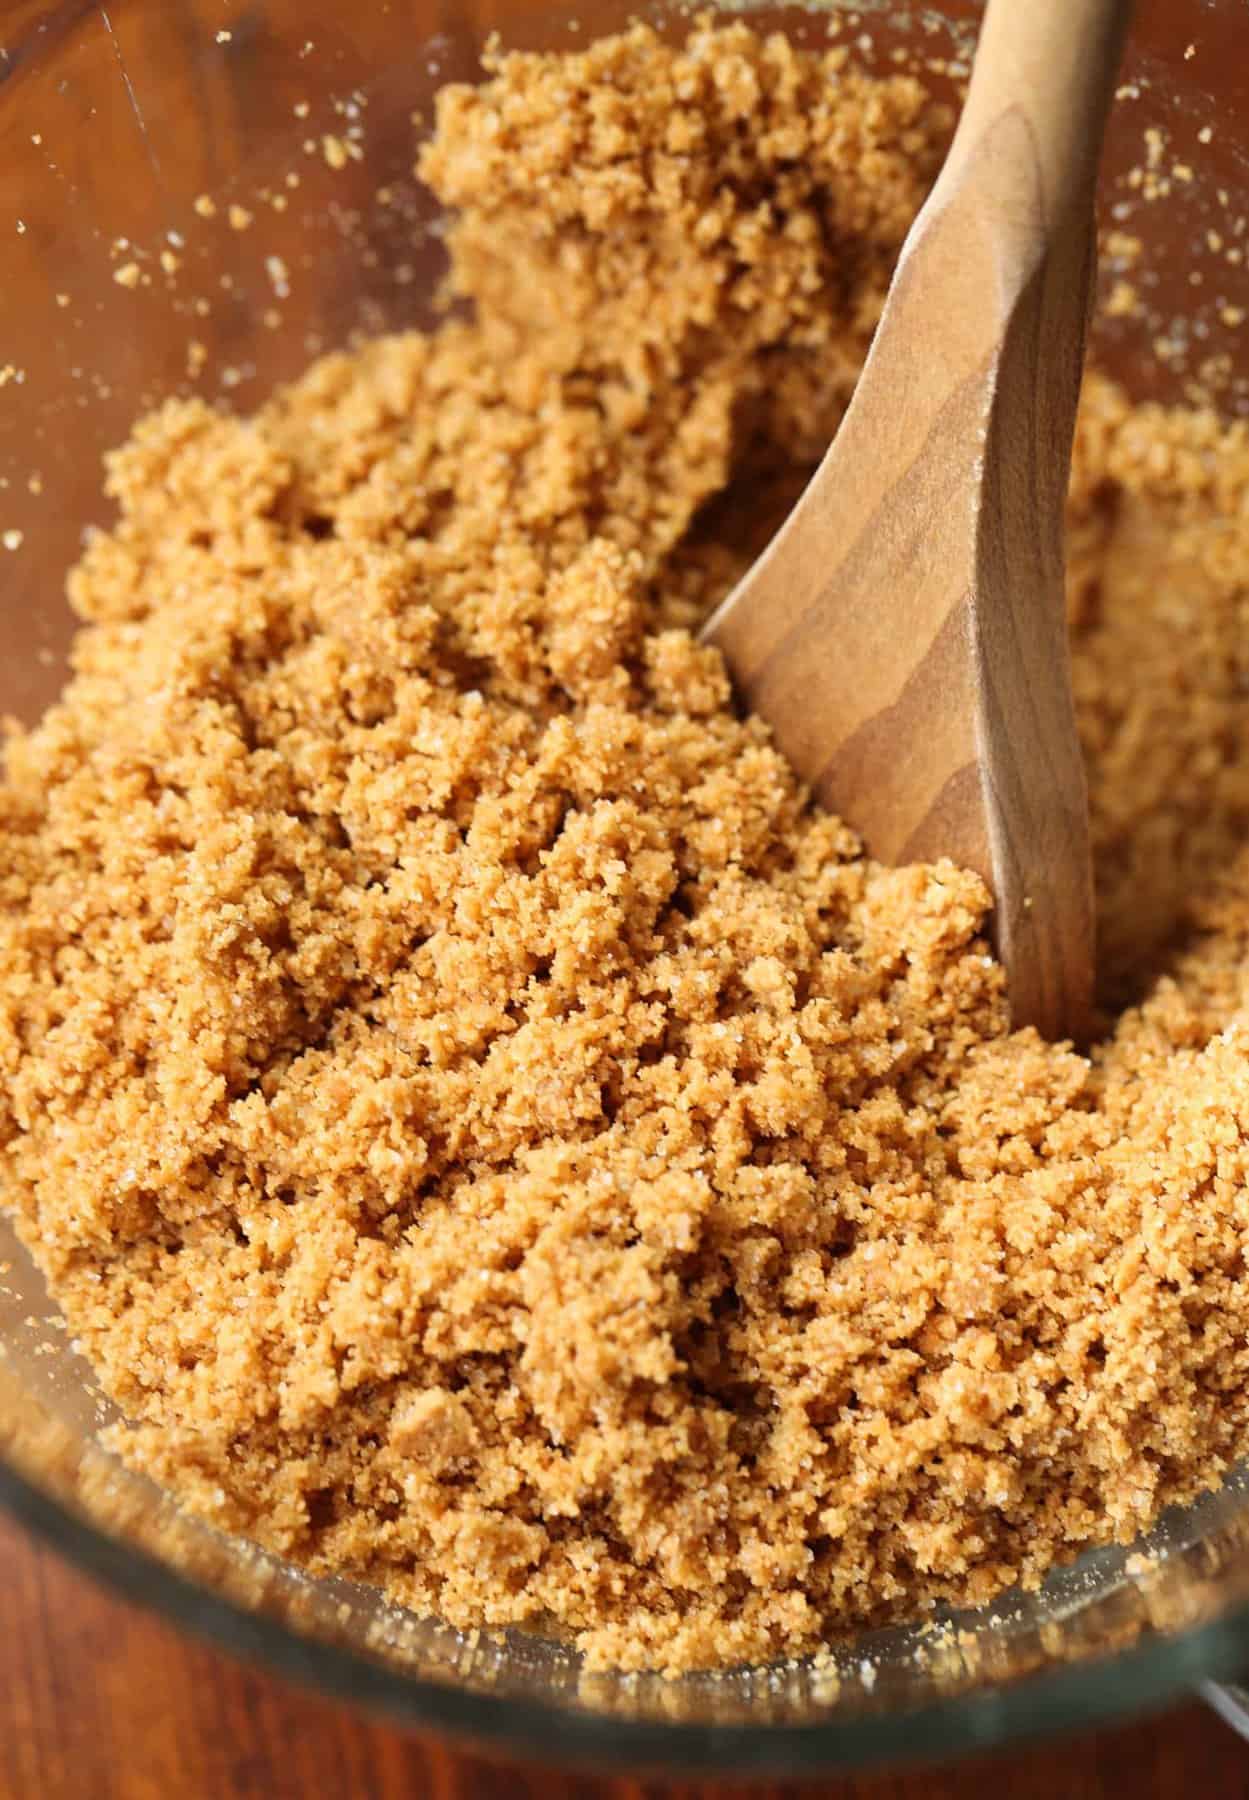 A bowl of graham cracker crumbs mixed with butter and sugar.